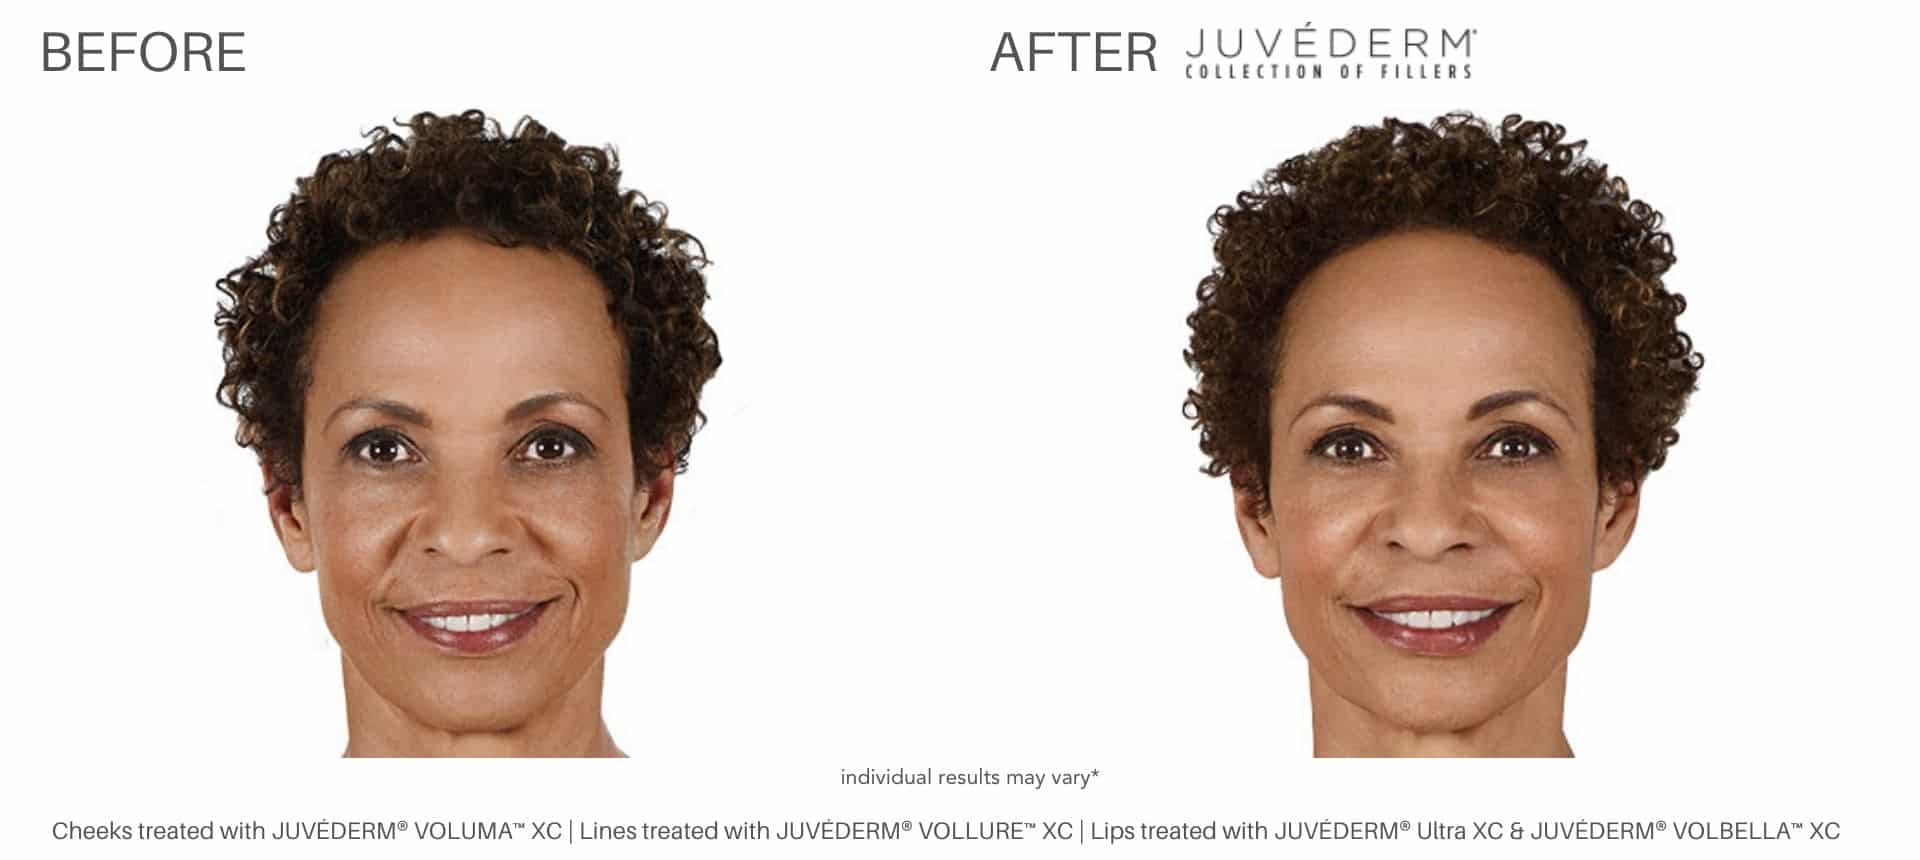 Juvéderm before and after results in Los Angeles, CA at Sculpt DTLA.